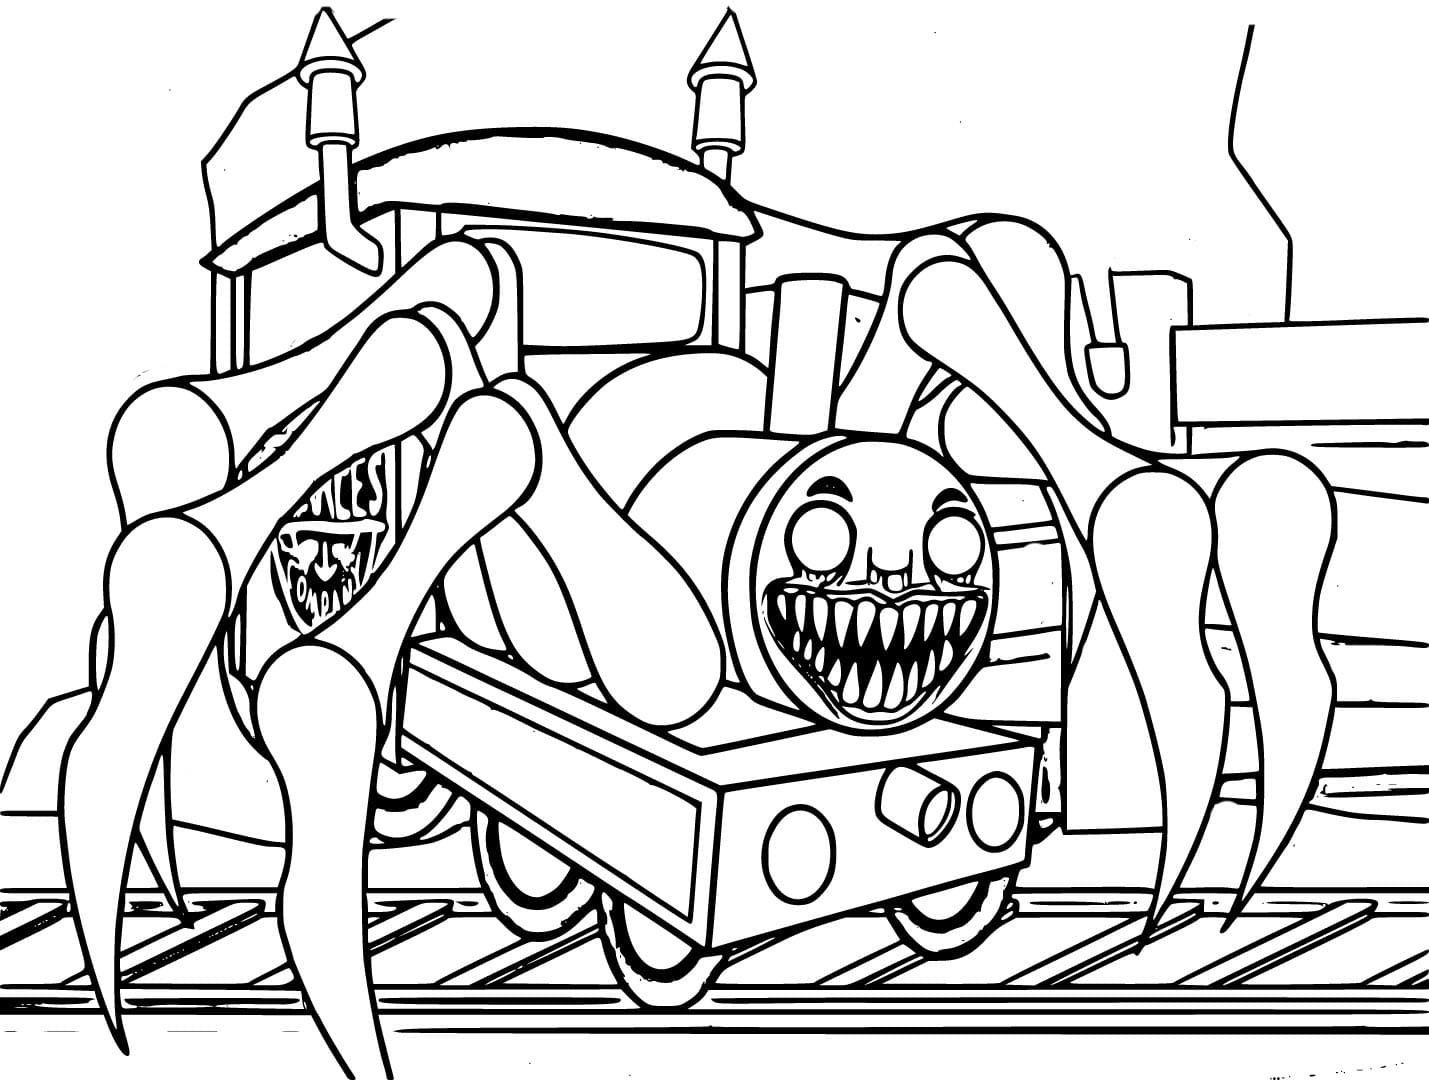 Choo-Choo Charles Picture coloring page - Download, Print or Color ...